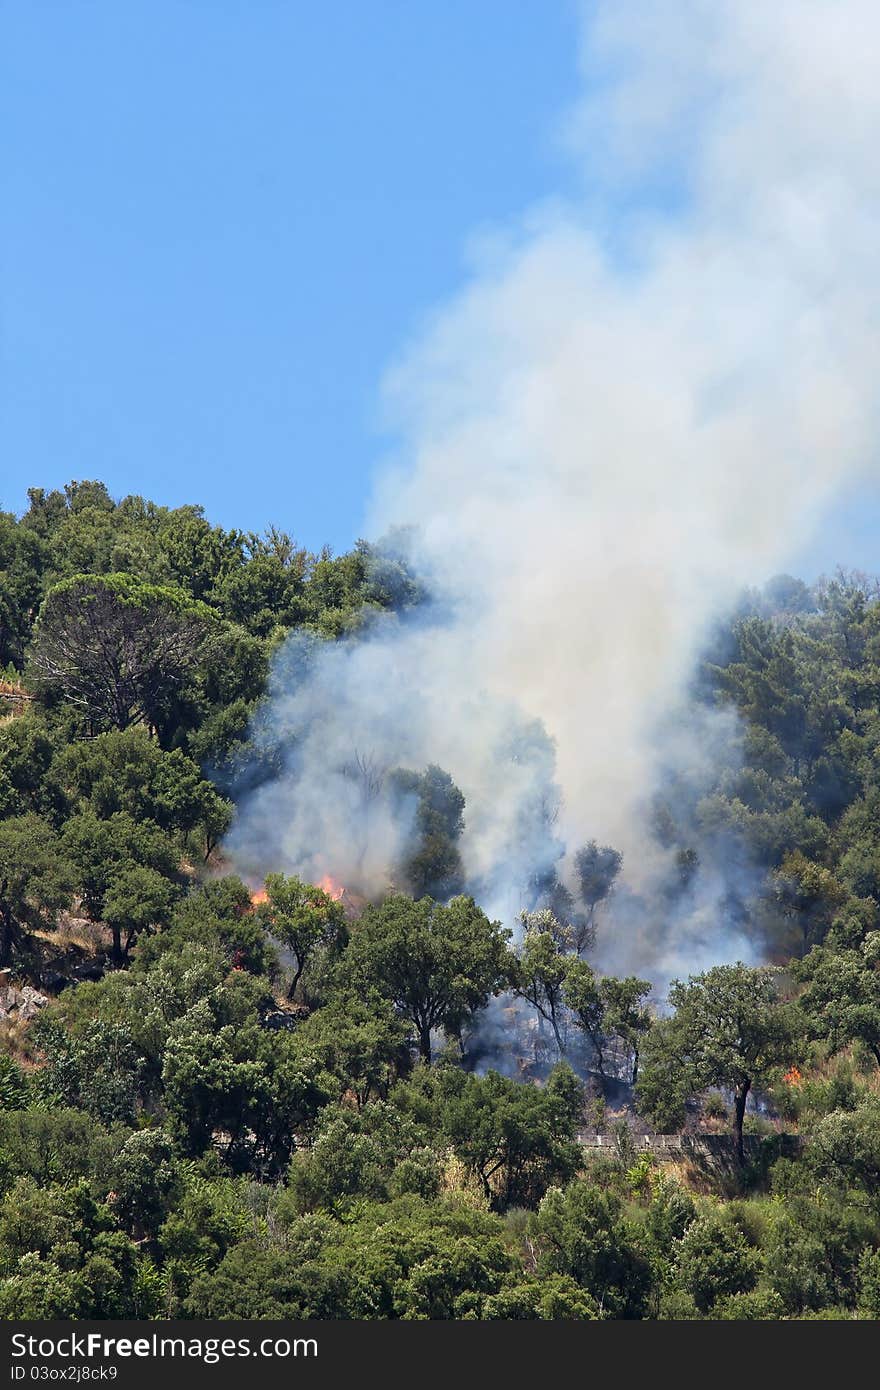 View of a fire in the forest of oaks and pines on the slopes of the Douro River